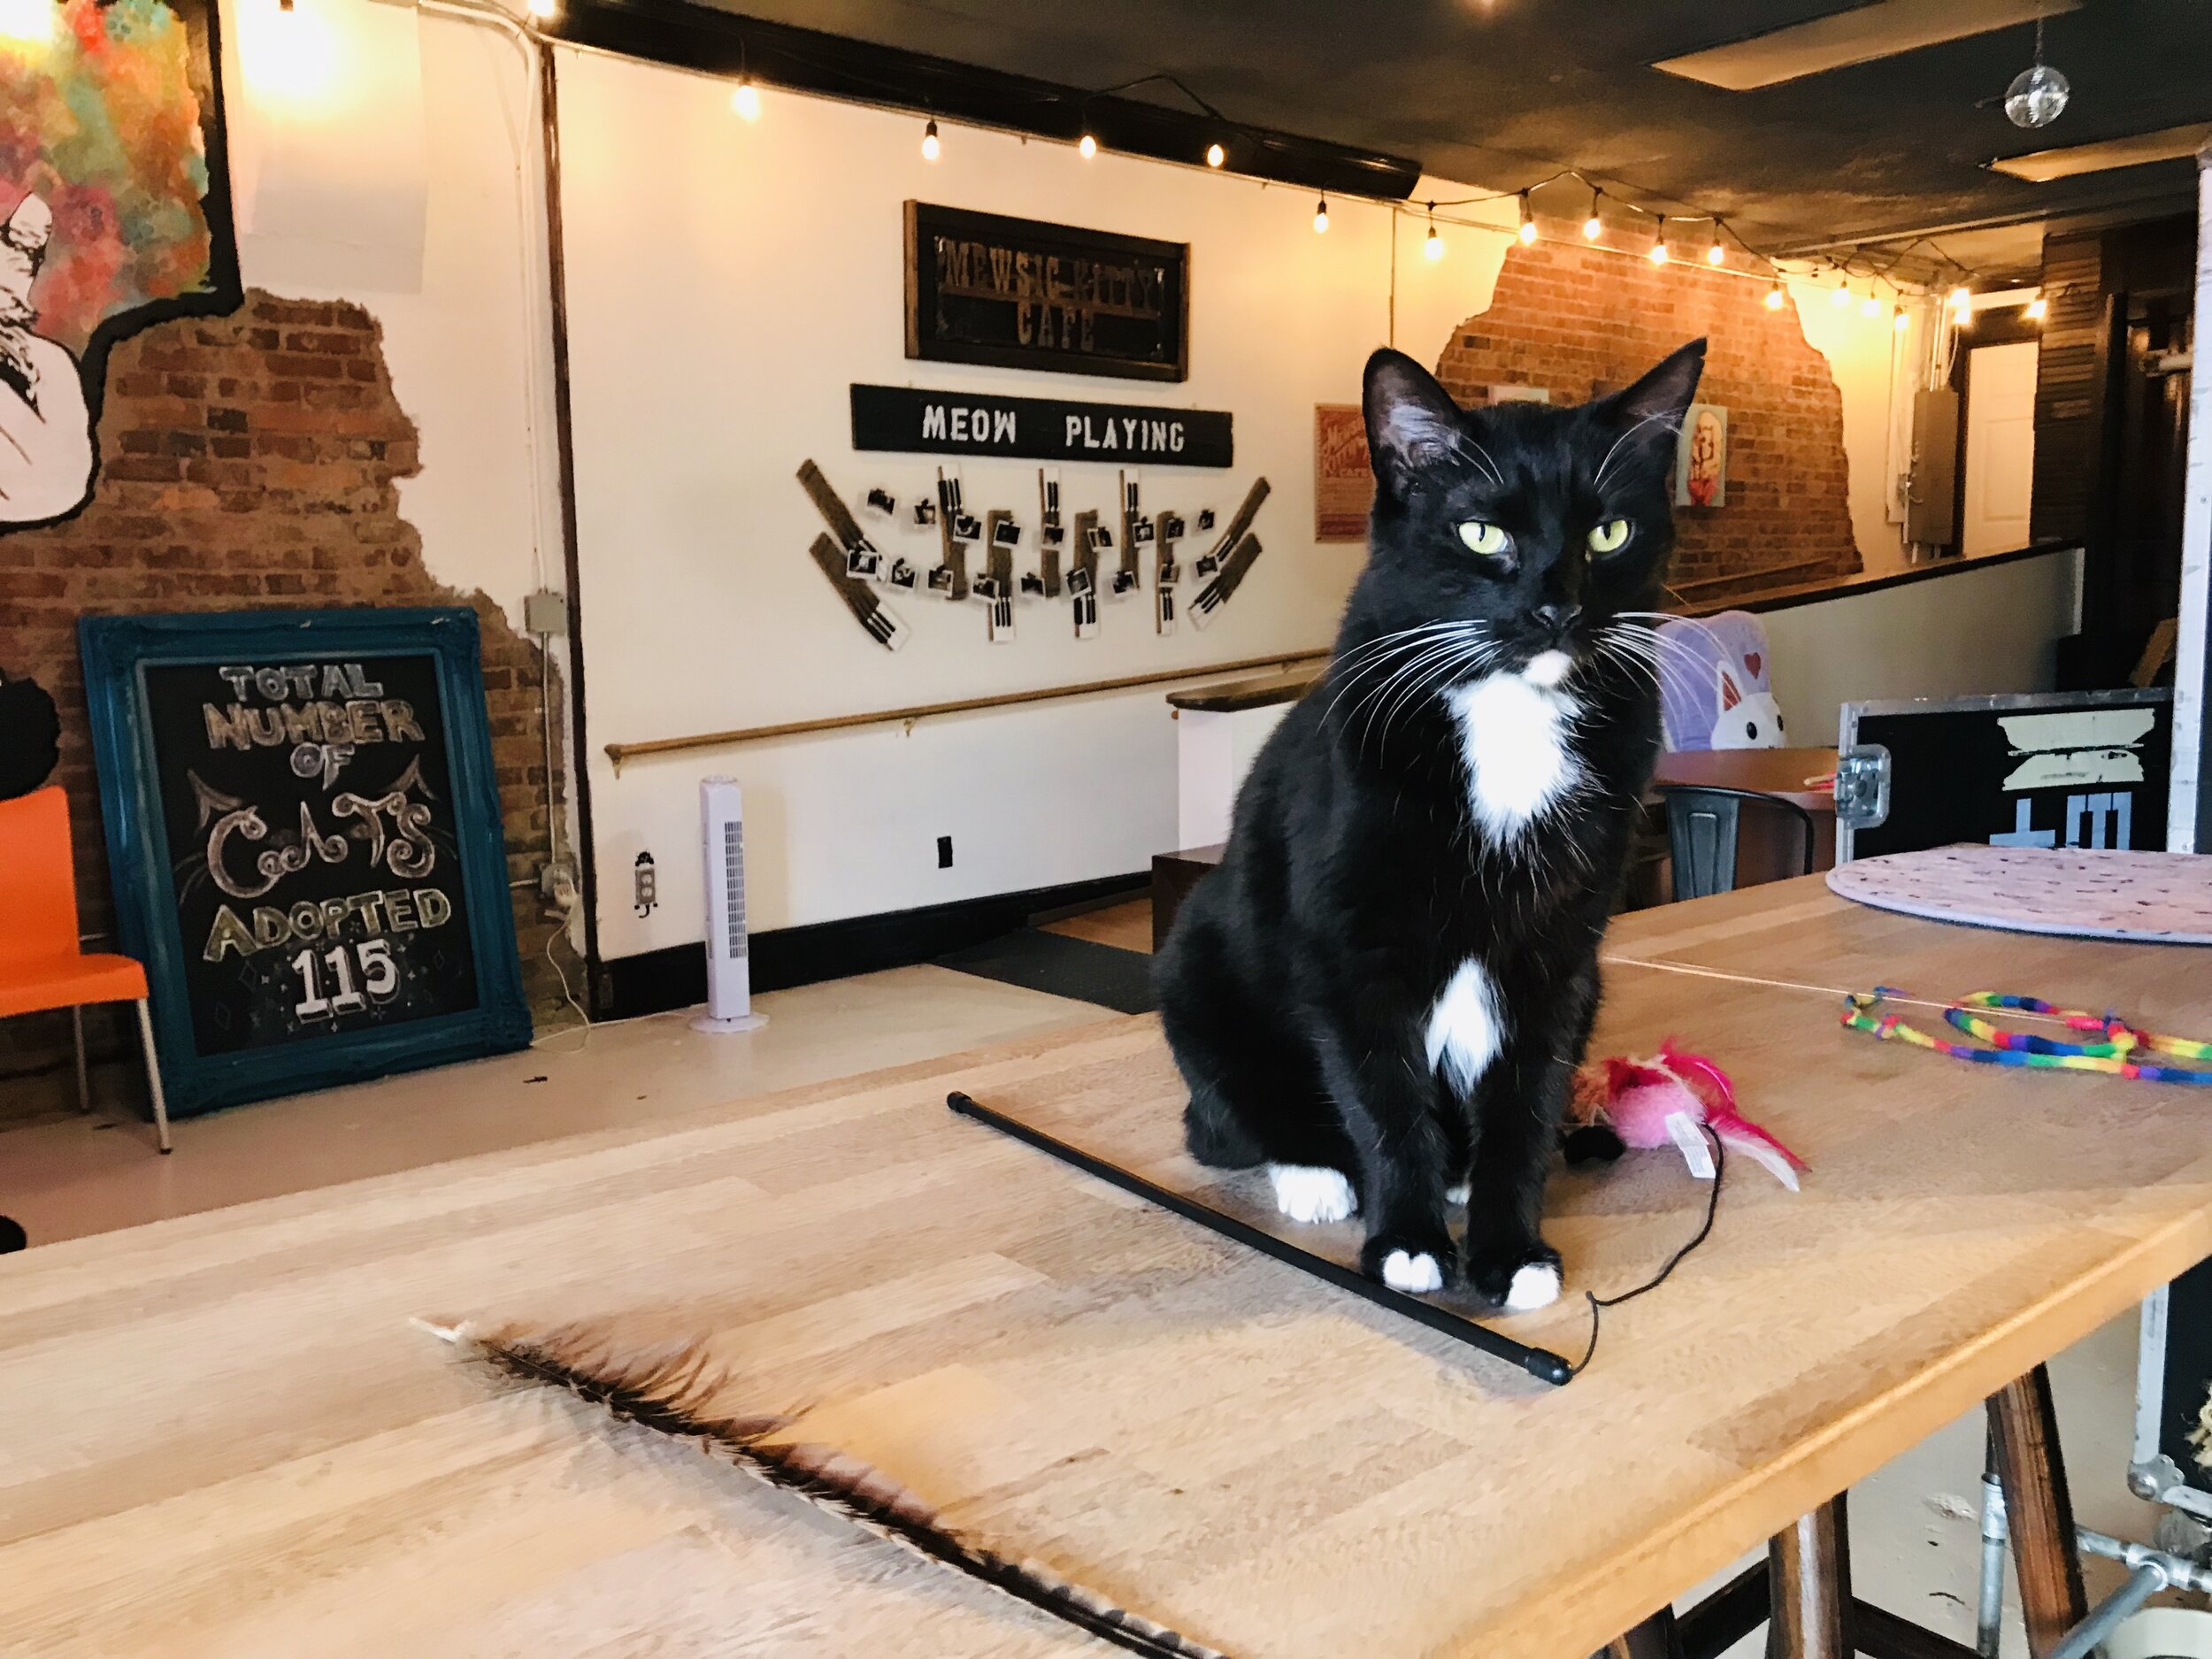 The Cat Cafe — The Neighbor's Cat